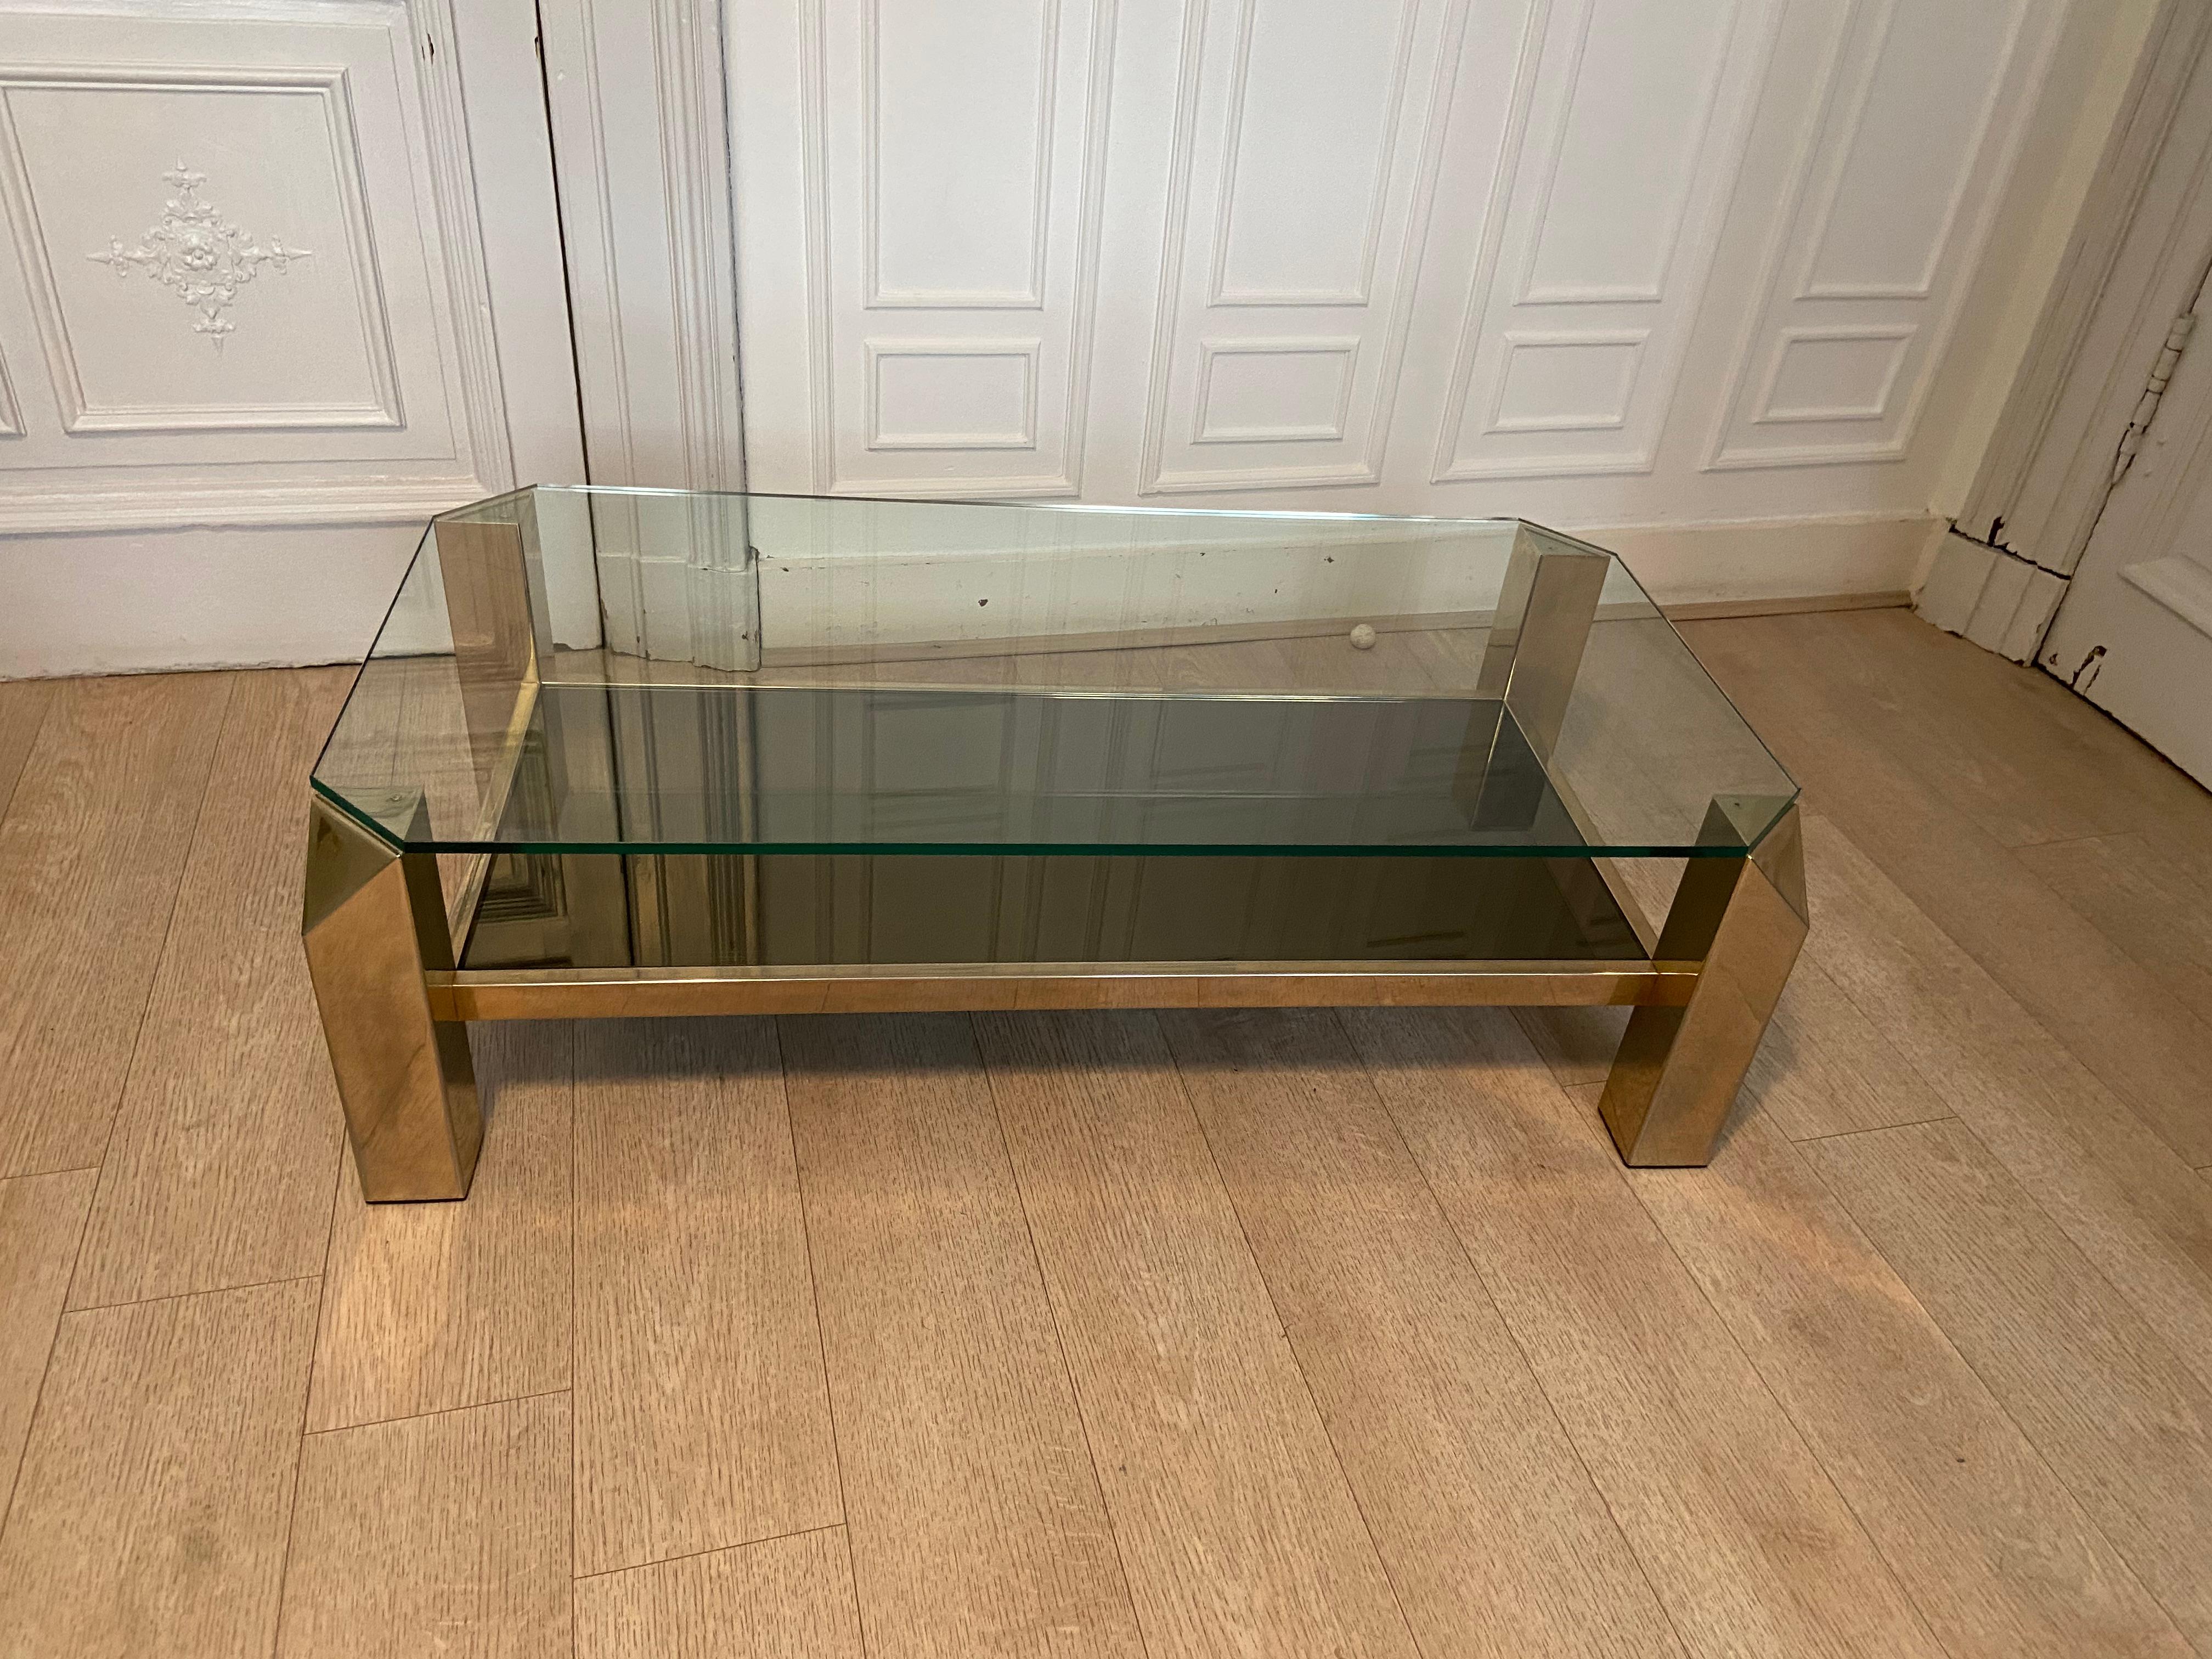 Produced by belgo chrom in the 70s. Metal structure gilded with fine 23 carat gold. Upper tray in transparent glass. Lower tray in bronze mirror. Very good vintage condition.
 